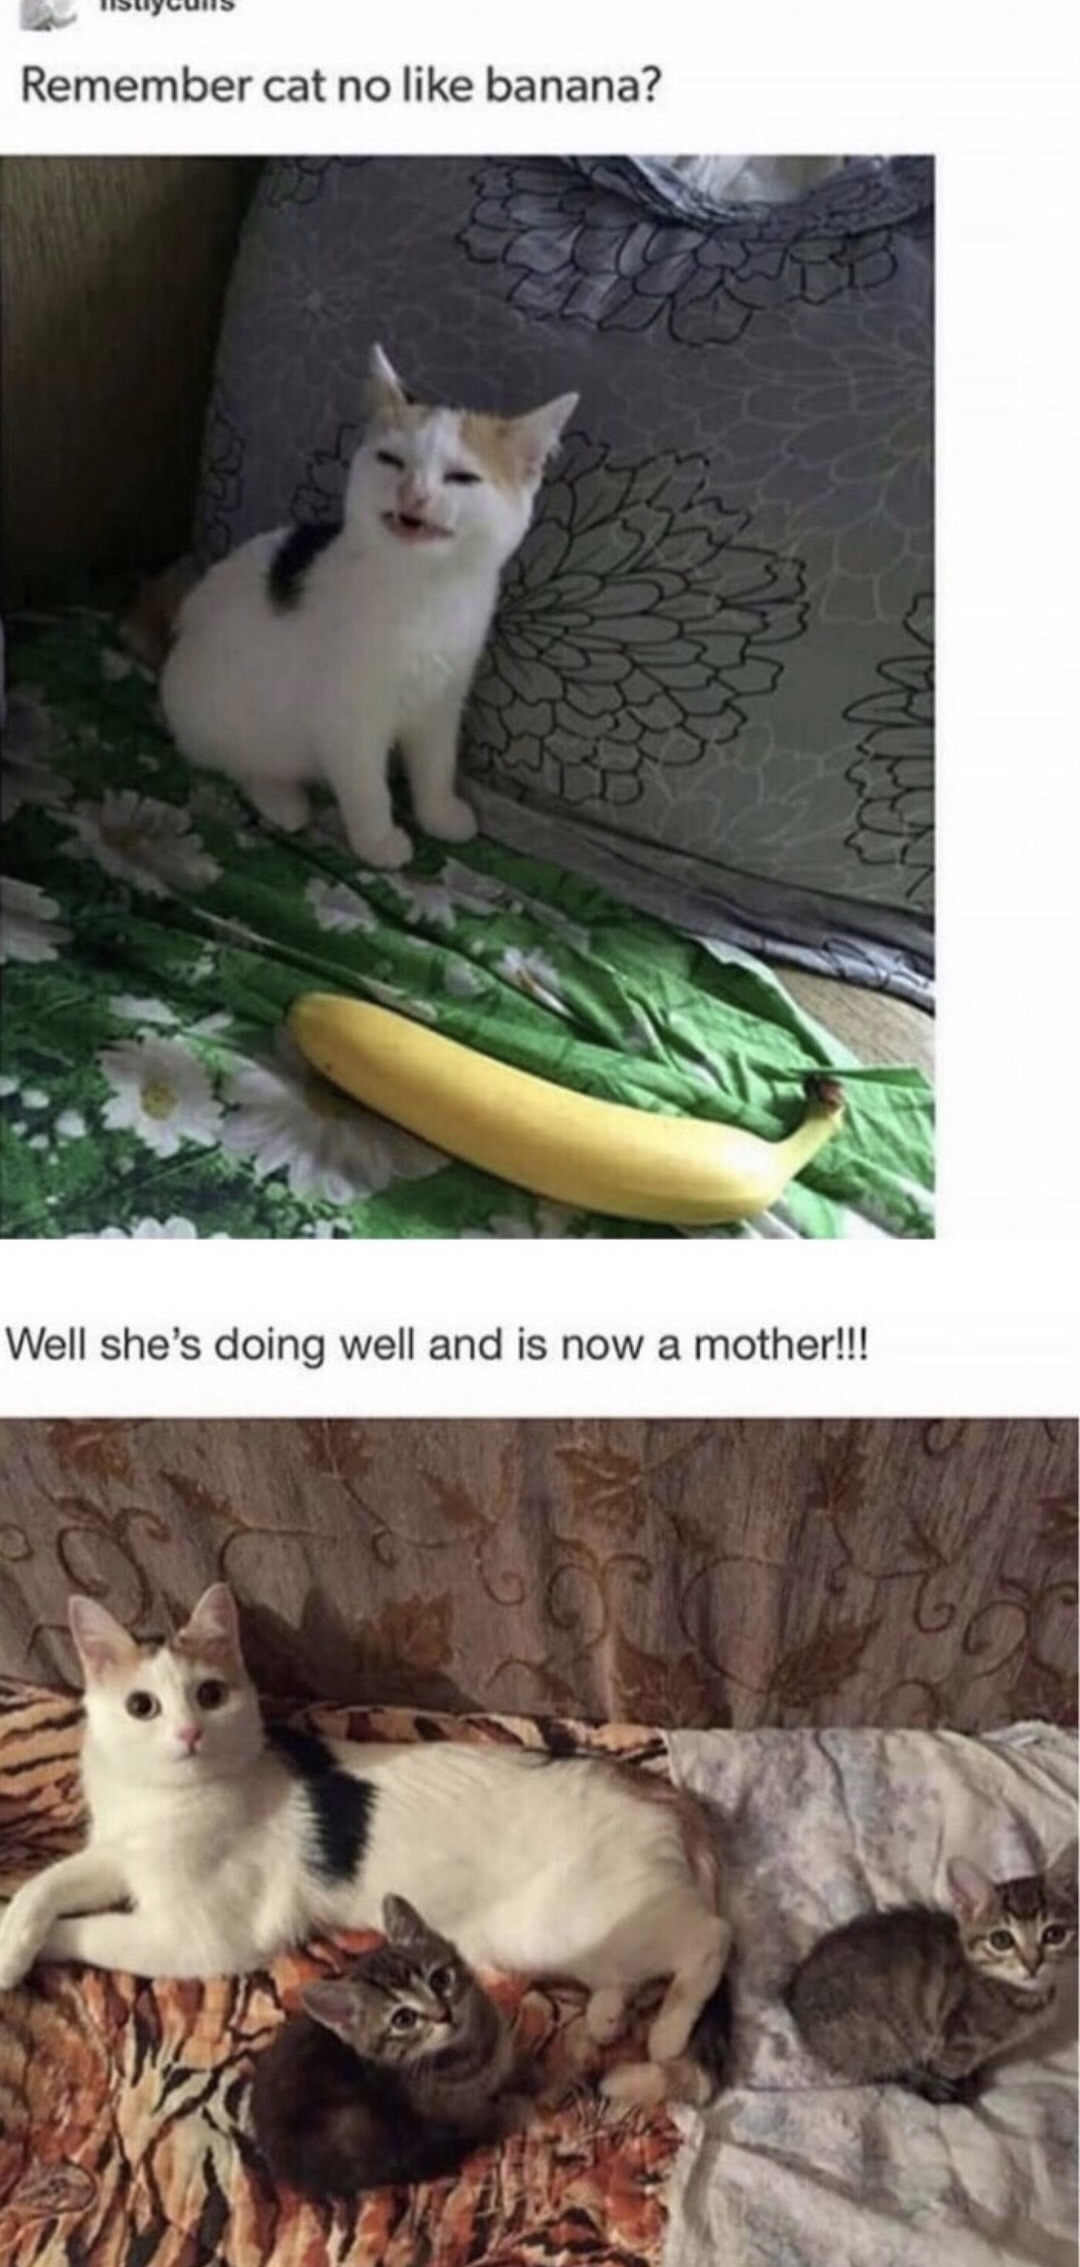 memes - cat no like banana - Remember cat no banana? Well she's doing well and is now a mother!!!